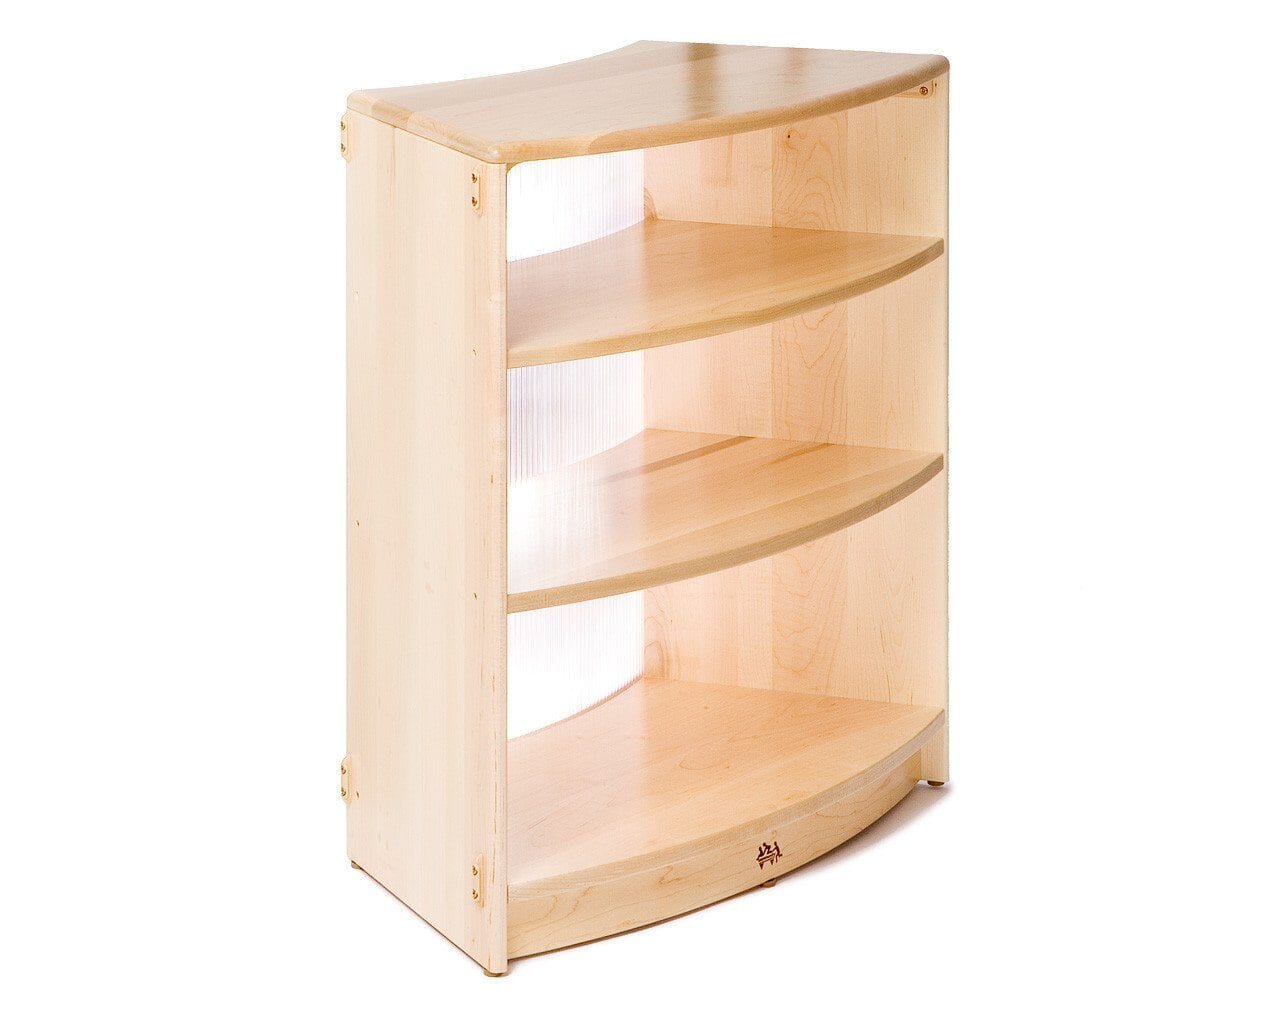 Sweep Shelves with Translucent Backing 32" by Community Playthings - louisekool